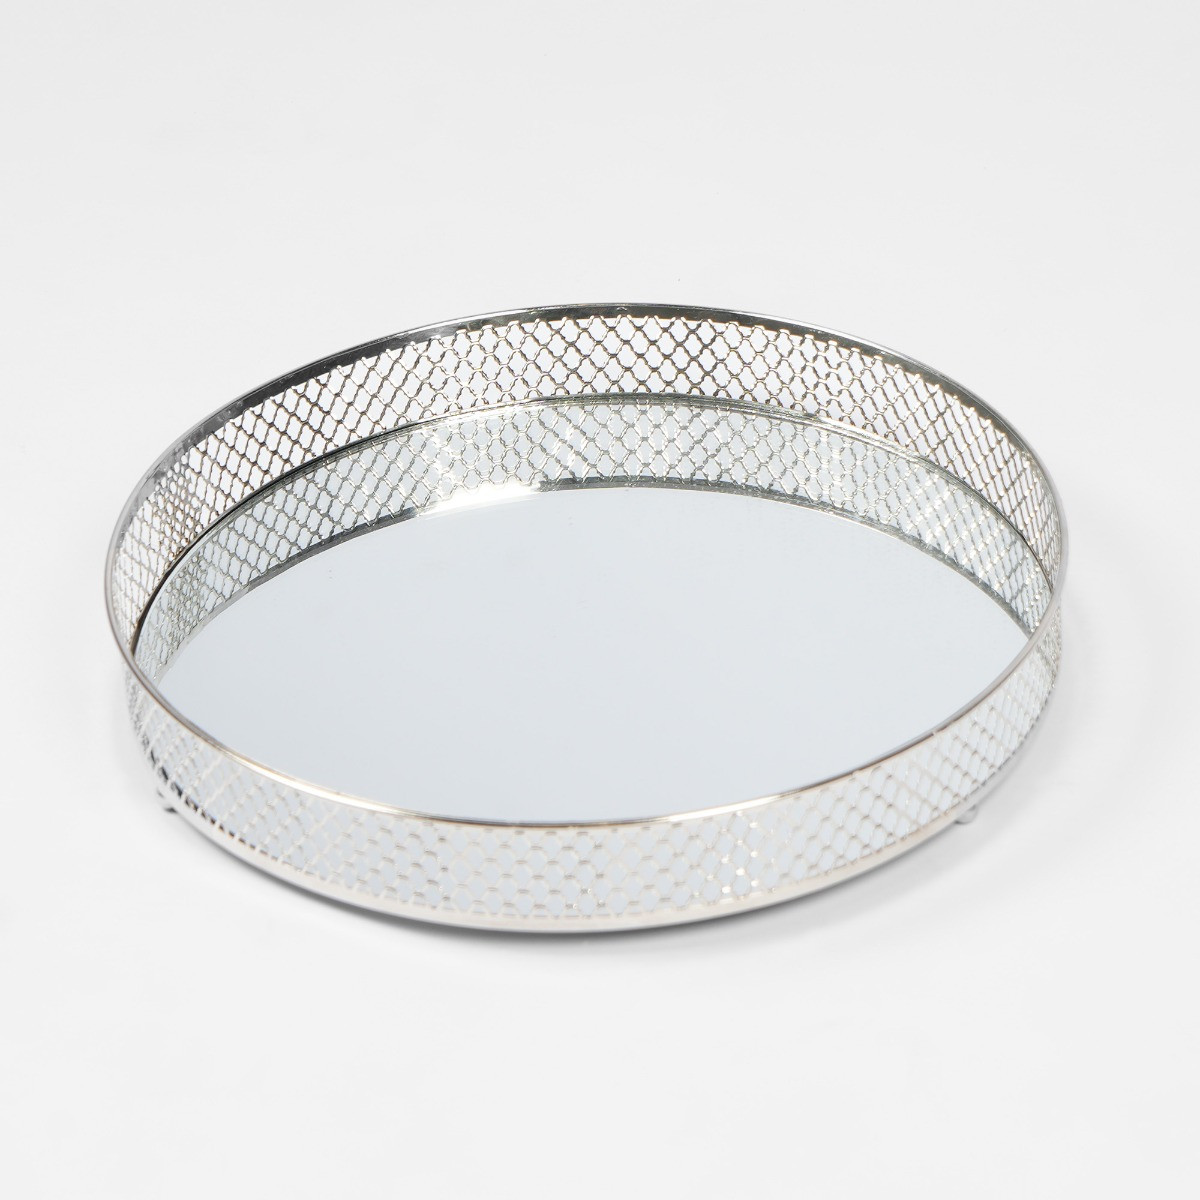 OHS Round Metal Mirrored Tray - Silver>